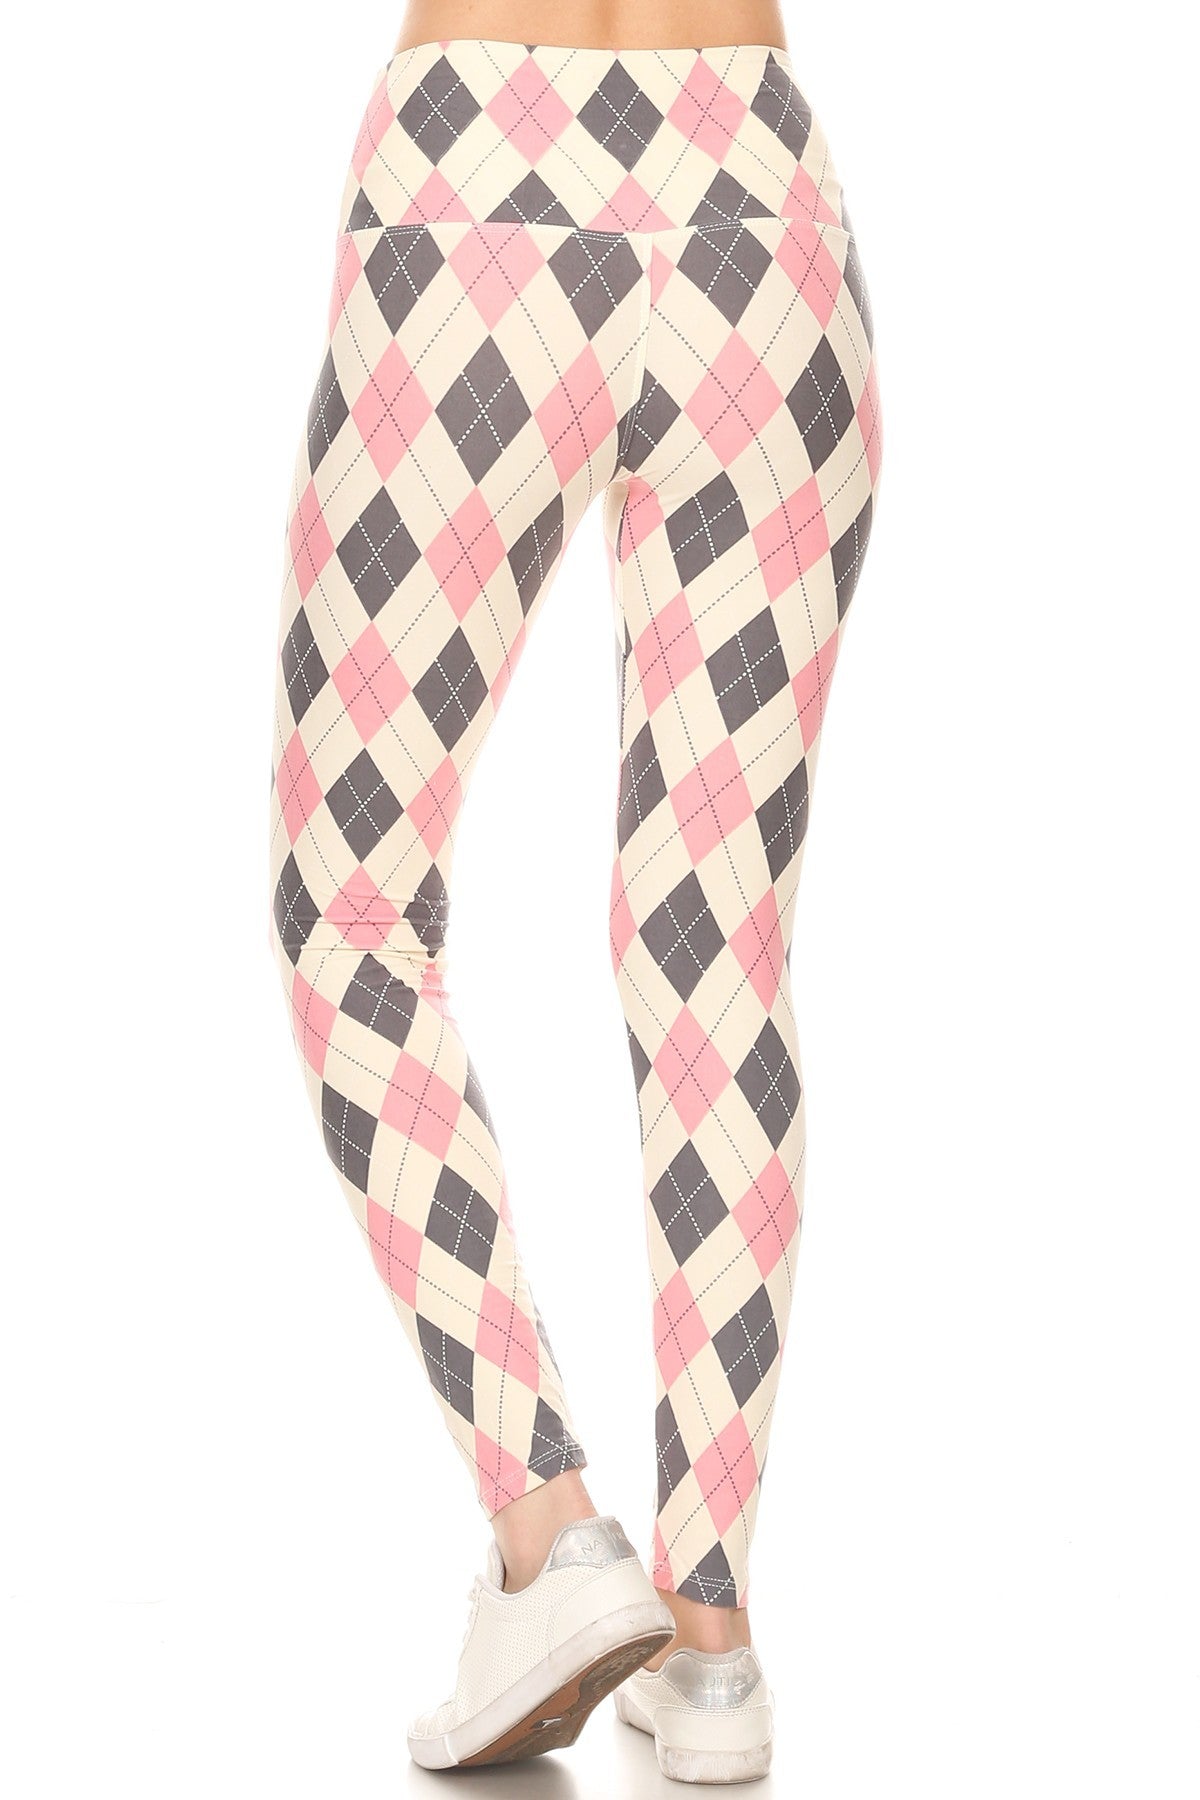 5-inch Long Yoga Style Banded Lined Argyle Printed Knit Legging With High Waist Naughty Smile Fashion